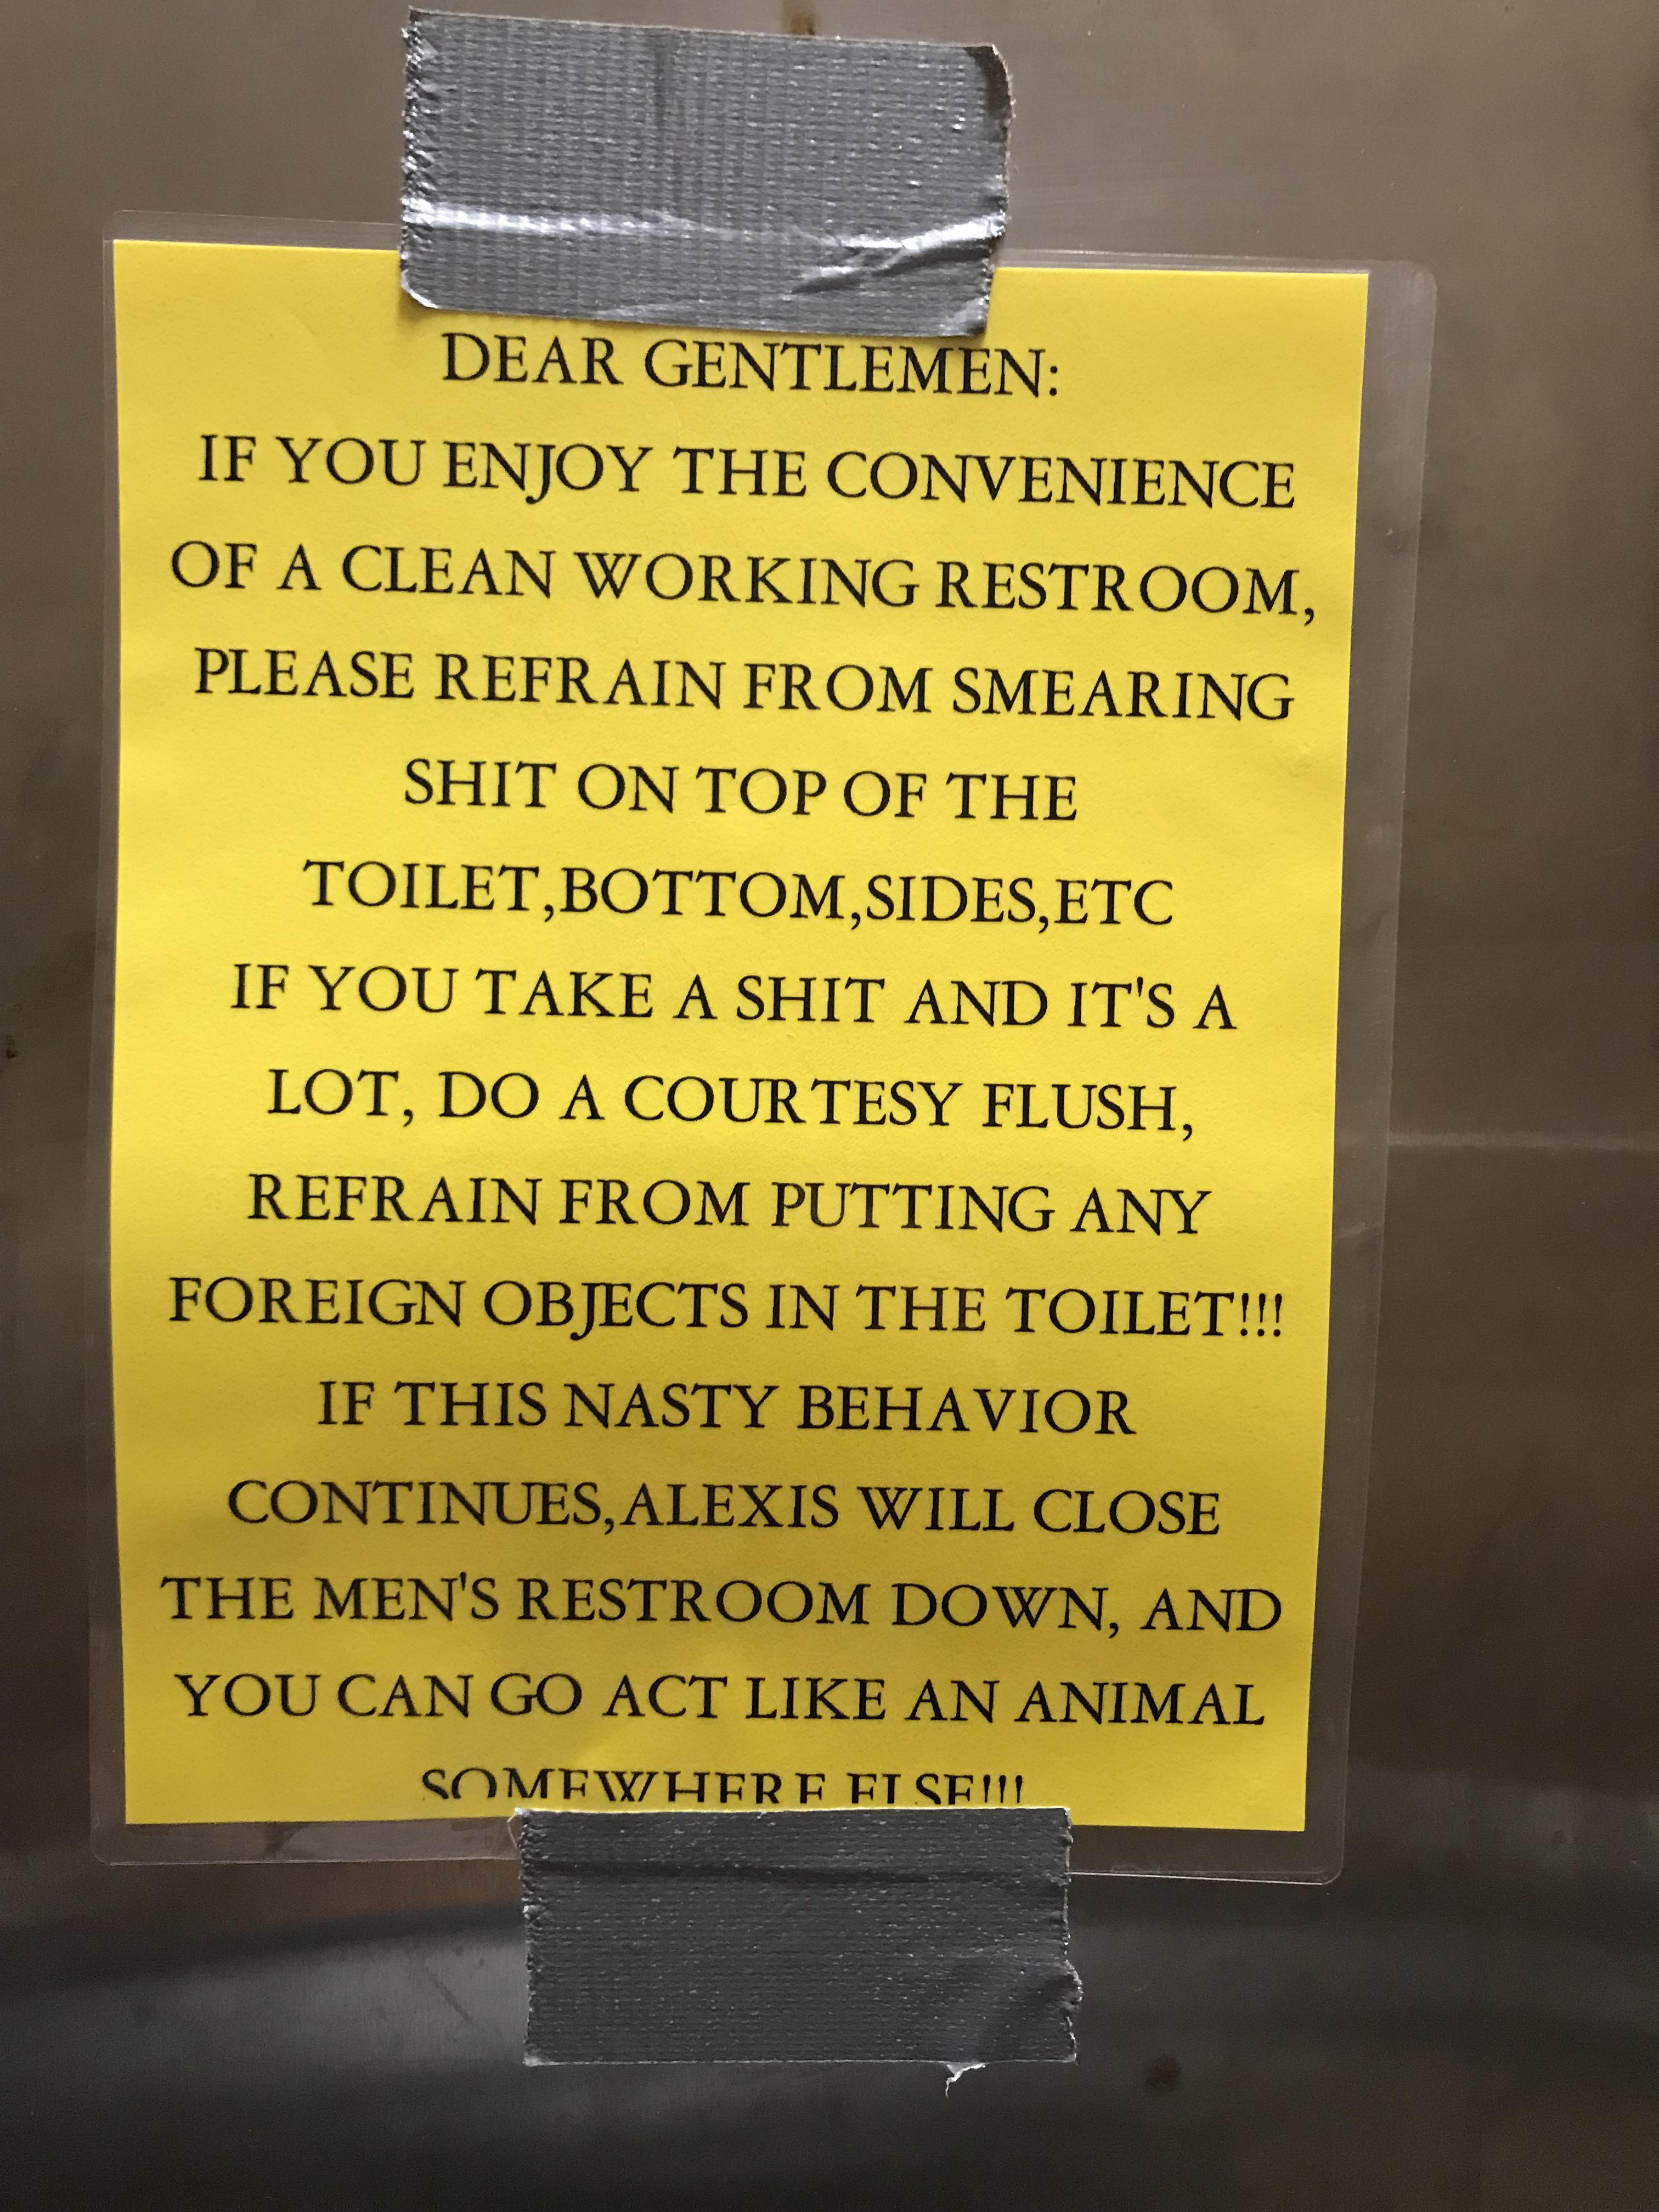 sign - Dear Gentlemen If You Enjoy The Convenience Of A Clean Working Restroom, Please Refrain From Smearing Shit On Top Of The Toilet,Bottom,Sides, Etc If You Take A Shit And It'S A Lot, Do A Courtesy Flush, Refrain From Putting Any Foreign Objects In Th